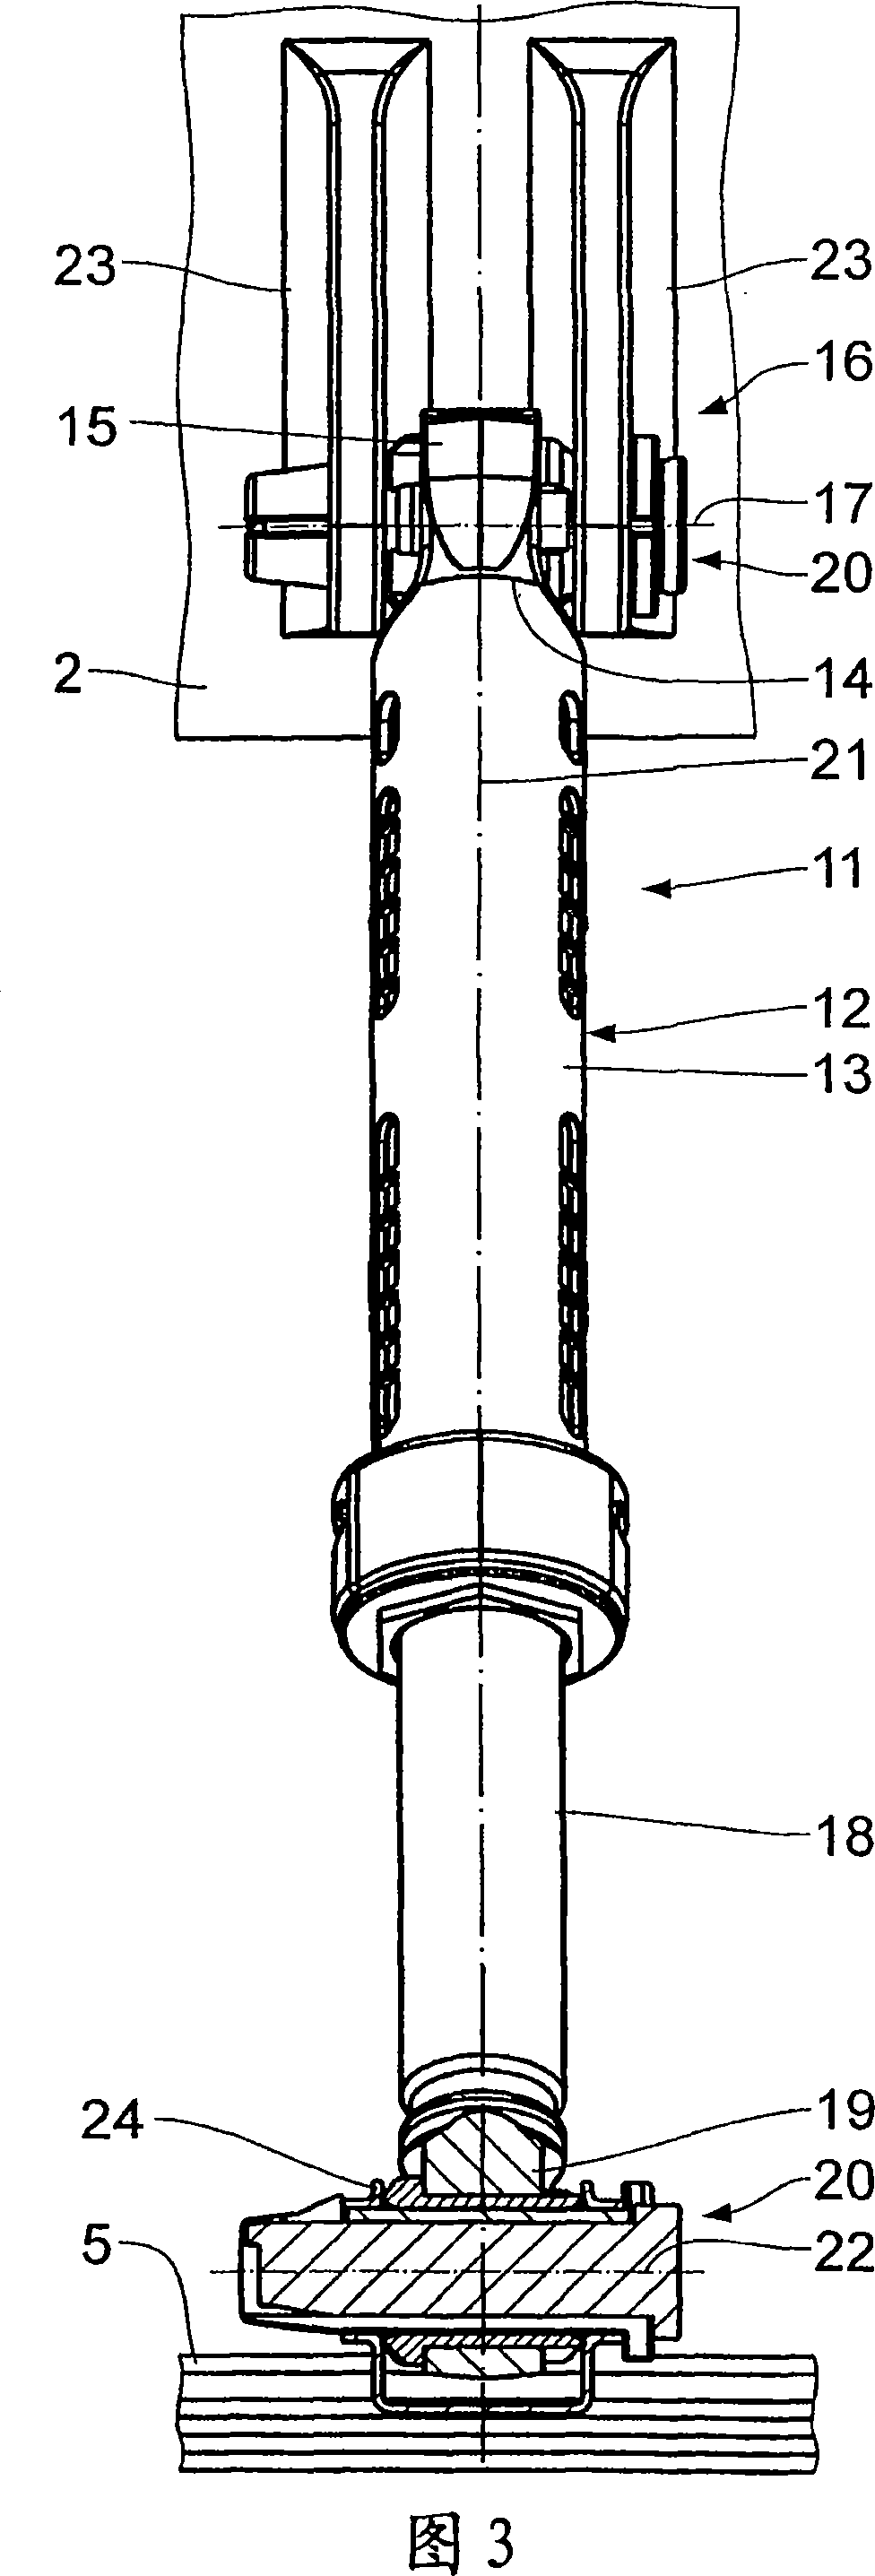 Connecting device for connecting of vibration damper to washing machine and/or frame of washing machine